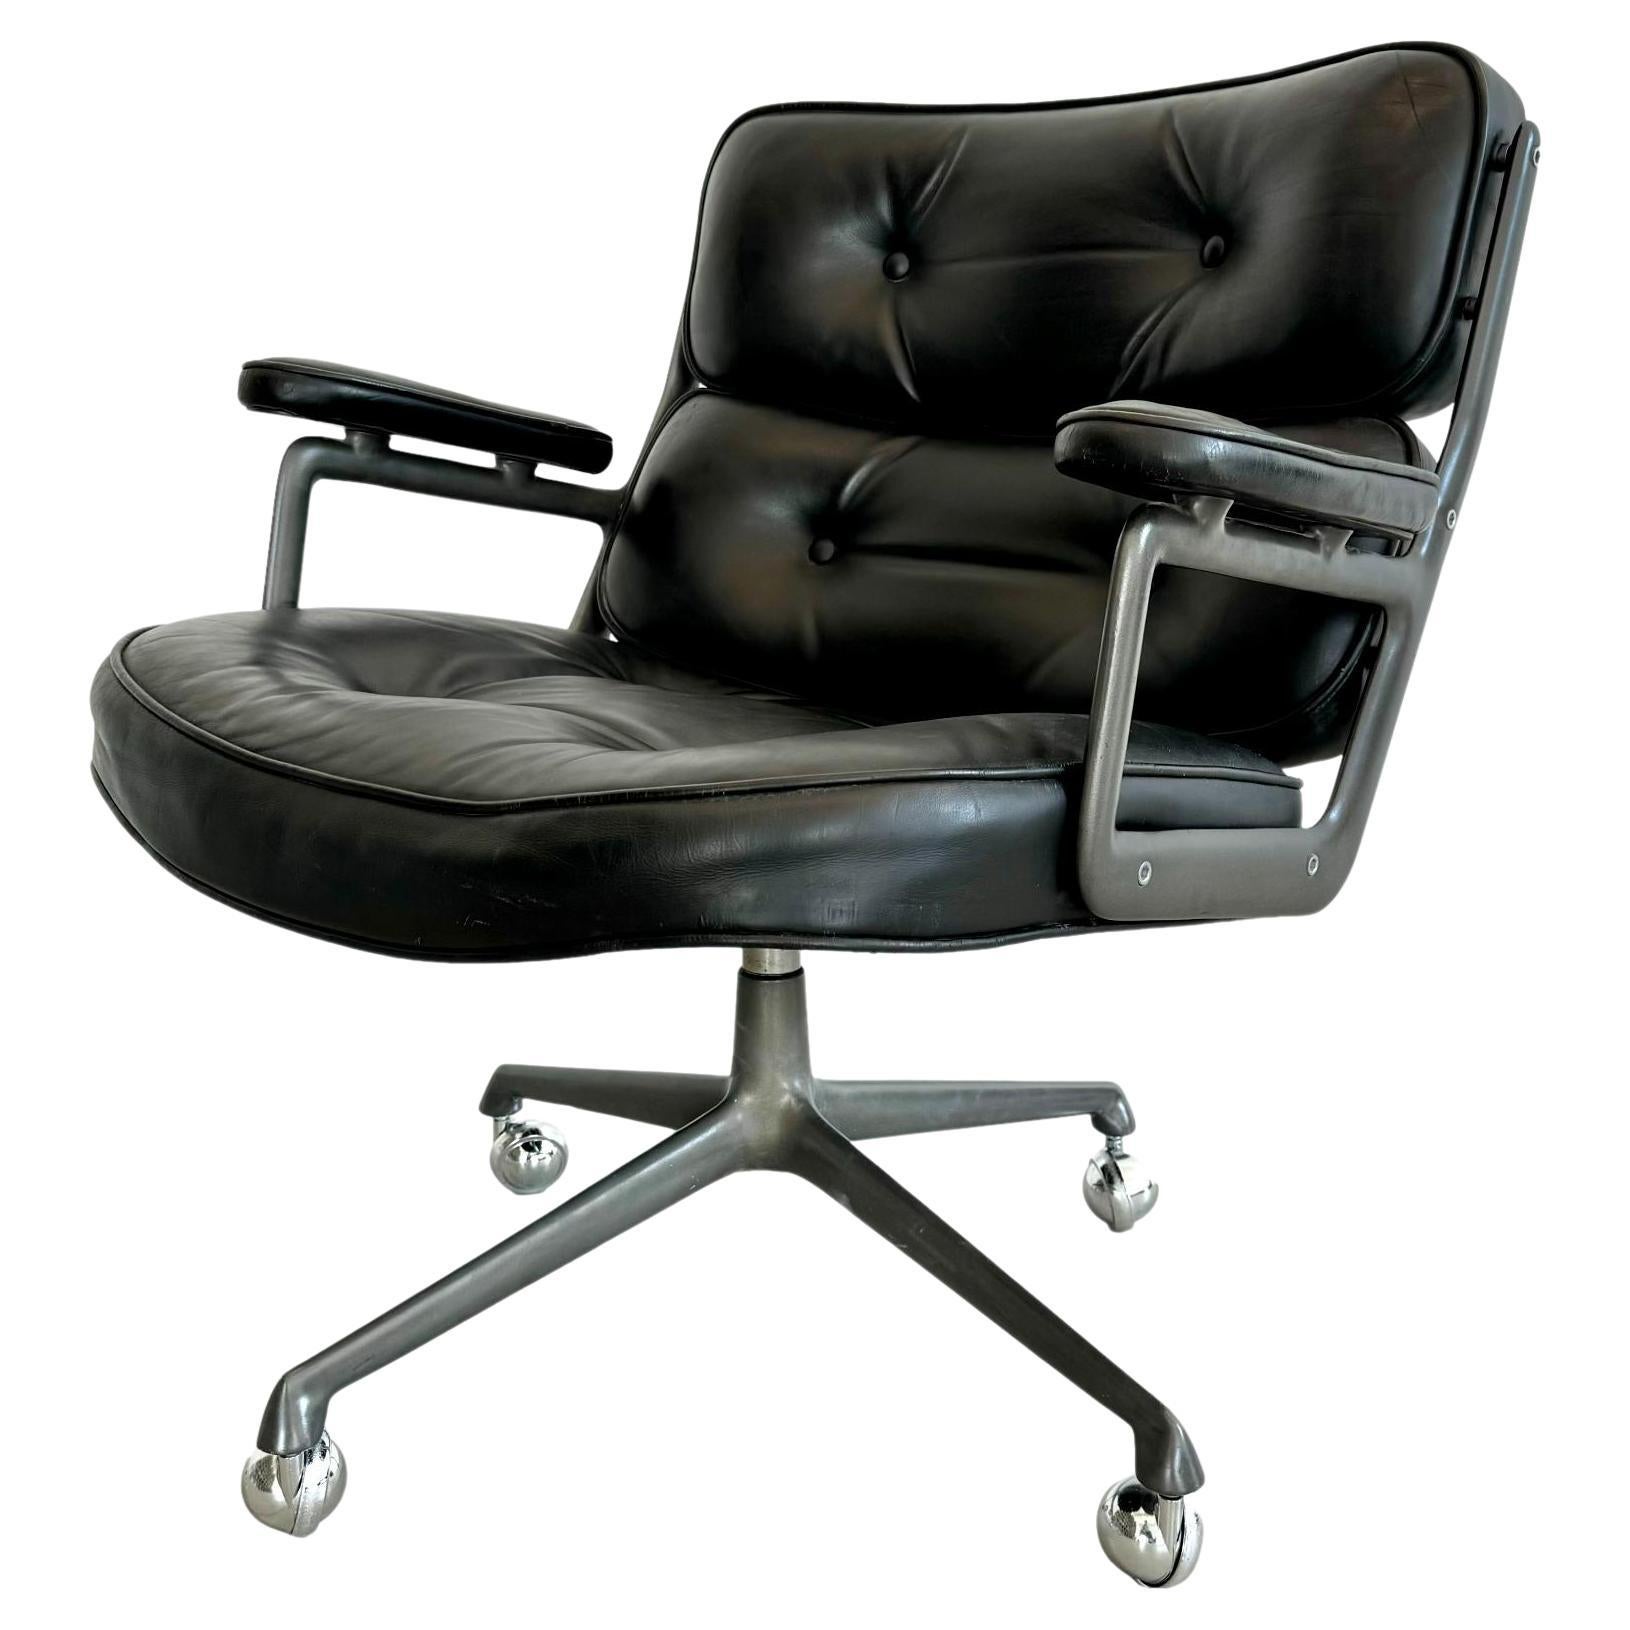 Eames Time Life Lobby Lounge Chair in Black Leather for Herman Miller, 1980s USA For Sale